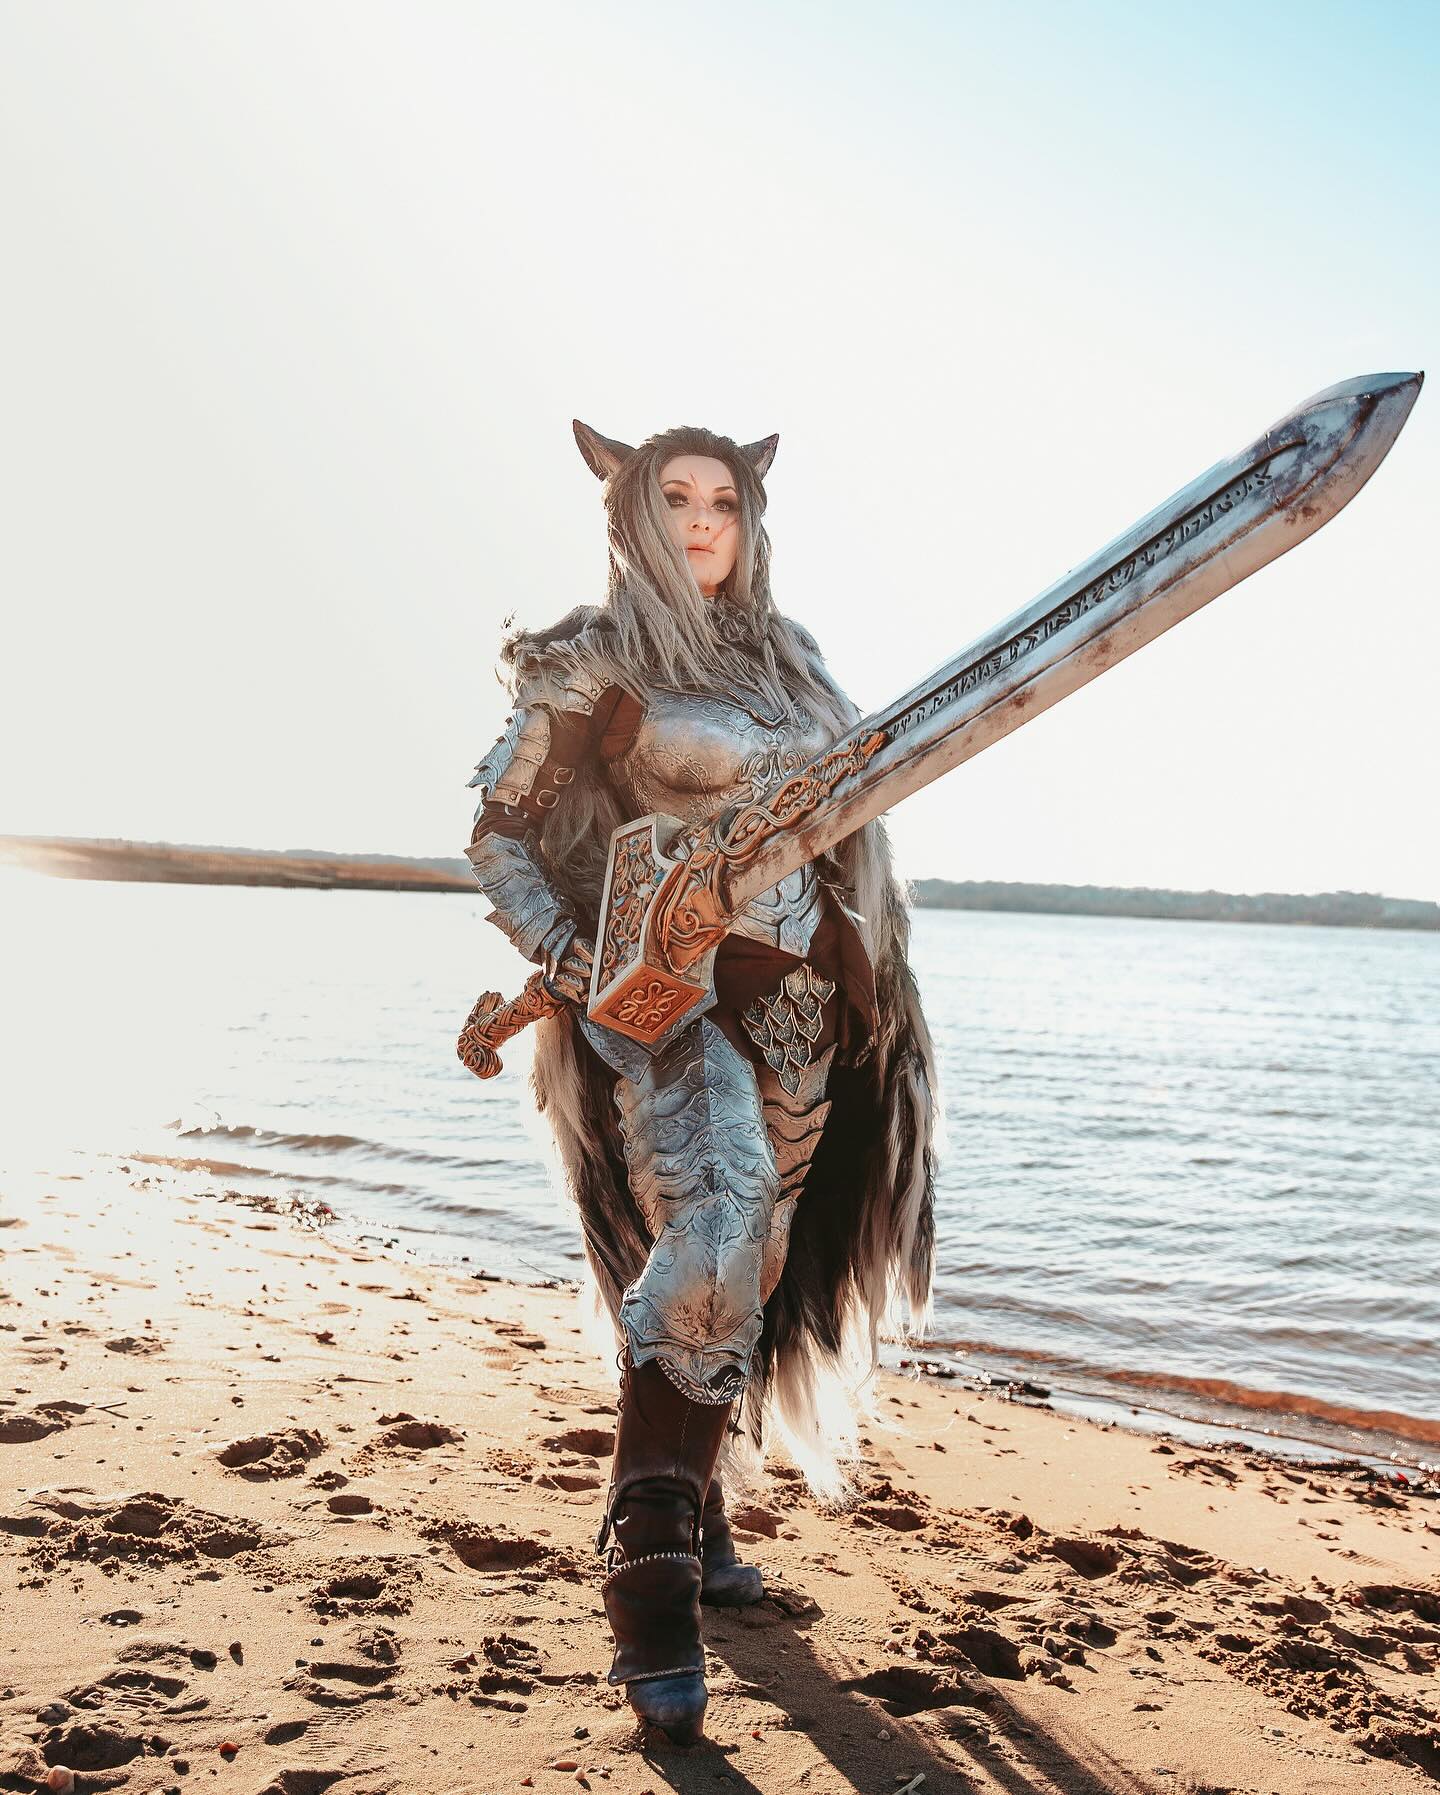 🐺⚔️𝐁 𝐢𝐬 𝐟𝐨𝐫 𝐁𝐋𝐀𝐈𝐃𝐃!⚔️🐺
DAY 2 of COSPLA-Z
Photo: @worldofgwendana 
Costume and sword made by me!
#cosplay #cosplayers #blaidd #eldenringcosplay #cosplaytoz #cospla-z #EldenRing